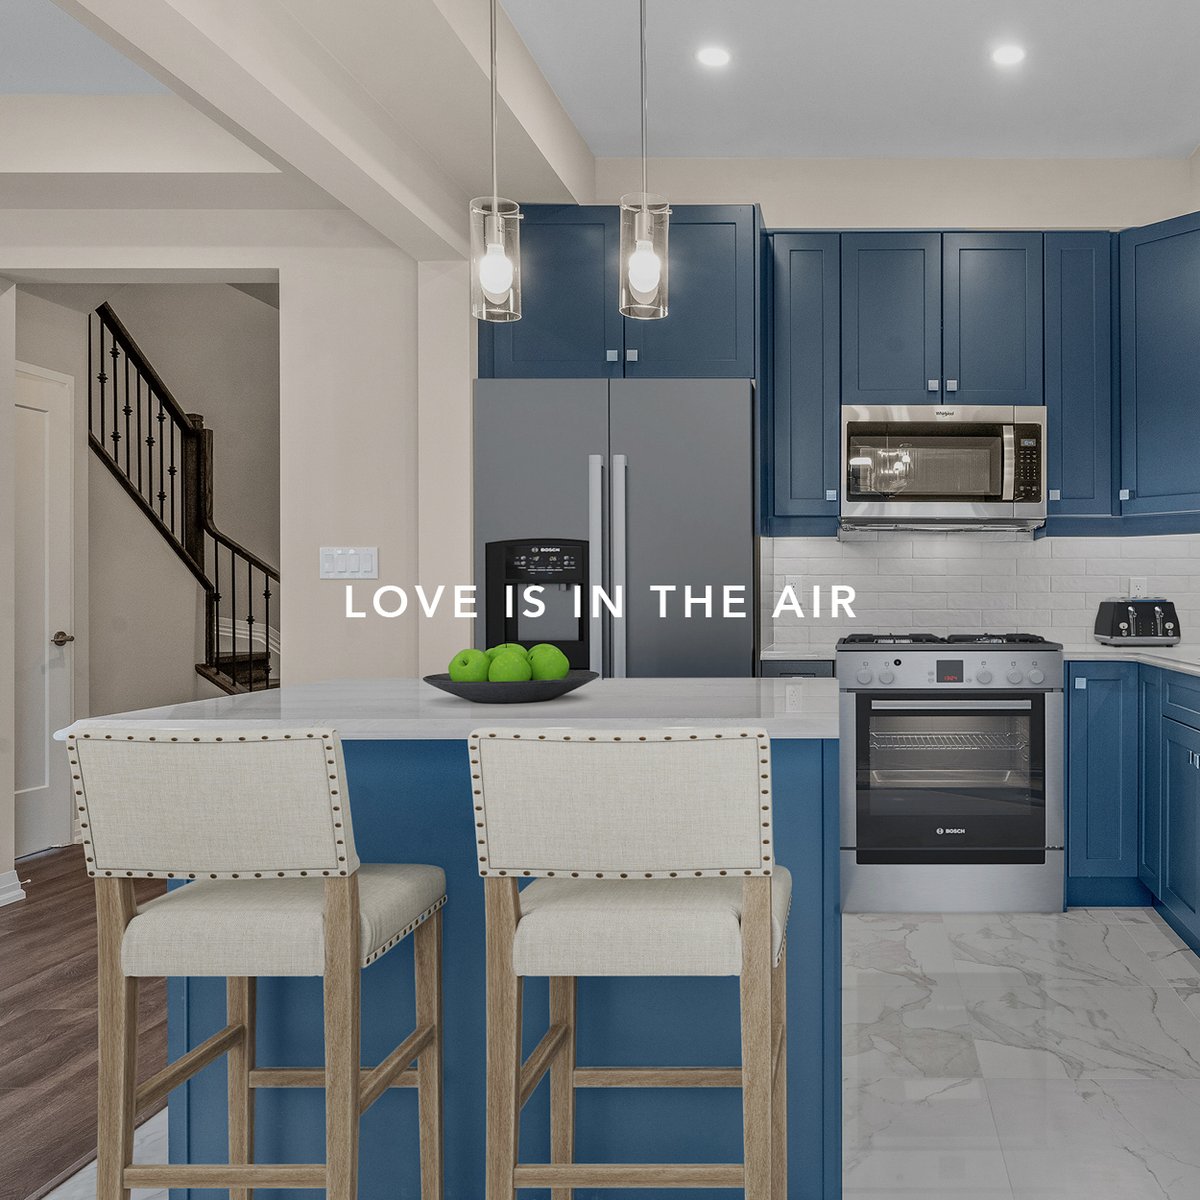 Love is in the air! Thoughtful designs you’ll fall in love with!

#modelhome #showhome #modern #niagara #niagaraliving #newhome #newhomes #newhomebuilder #homebuilder #niagarahomebuilder #mountainviewhomes #mountainviewbuildinggroup